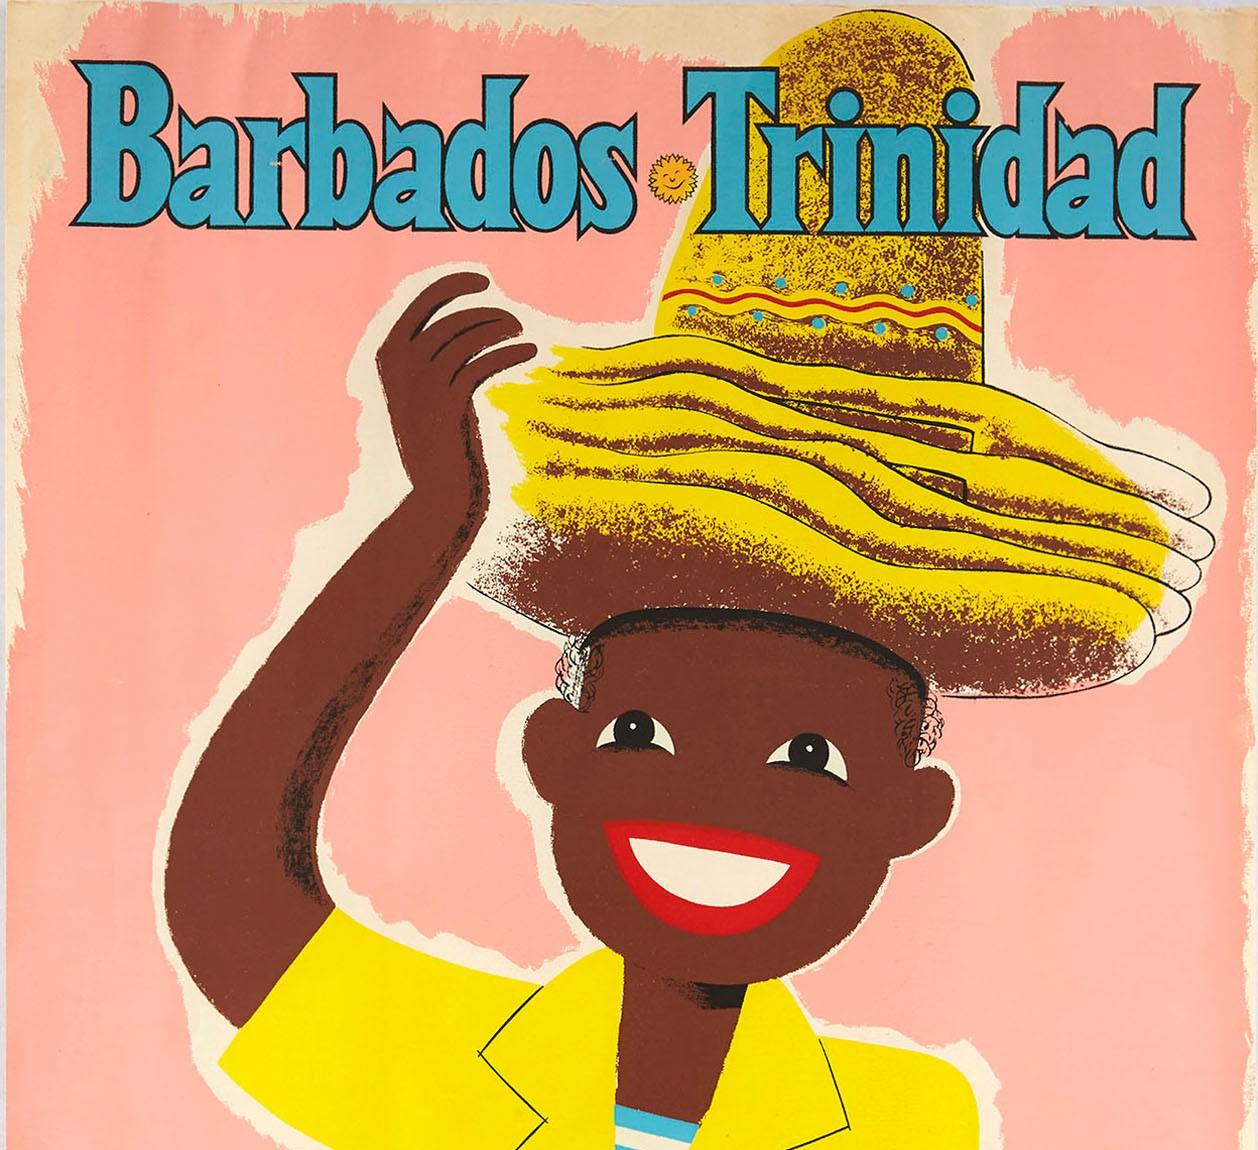 Original Vintage Travel Poster Barbados Trinidad Fly TCA Trans Canadian Airlines - Print by Unknown